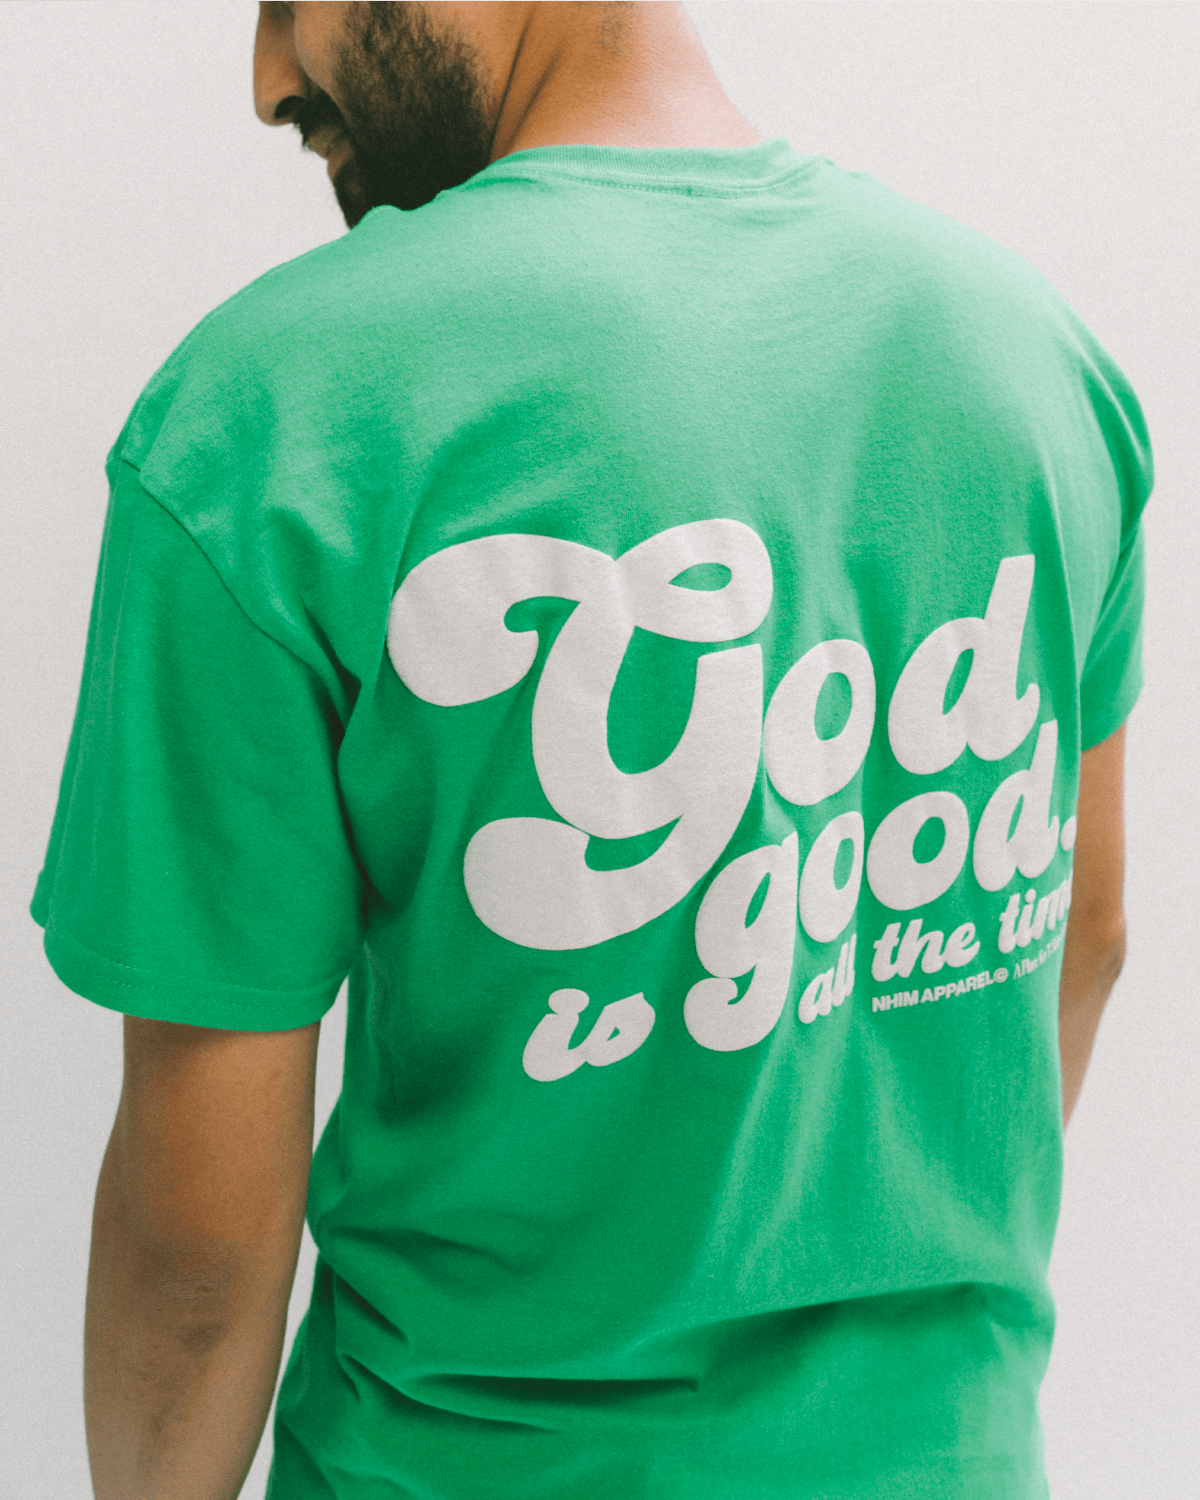 God is Good! God is good all the time Christian t-shirt green. puff print. Nhim Apparel Christian clothing company, a place for t-shirts and prayer. Made in USA.